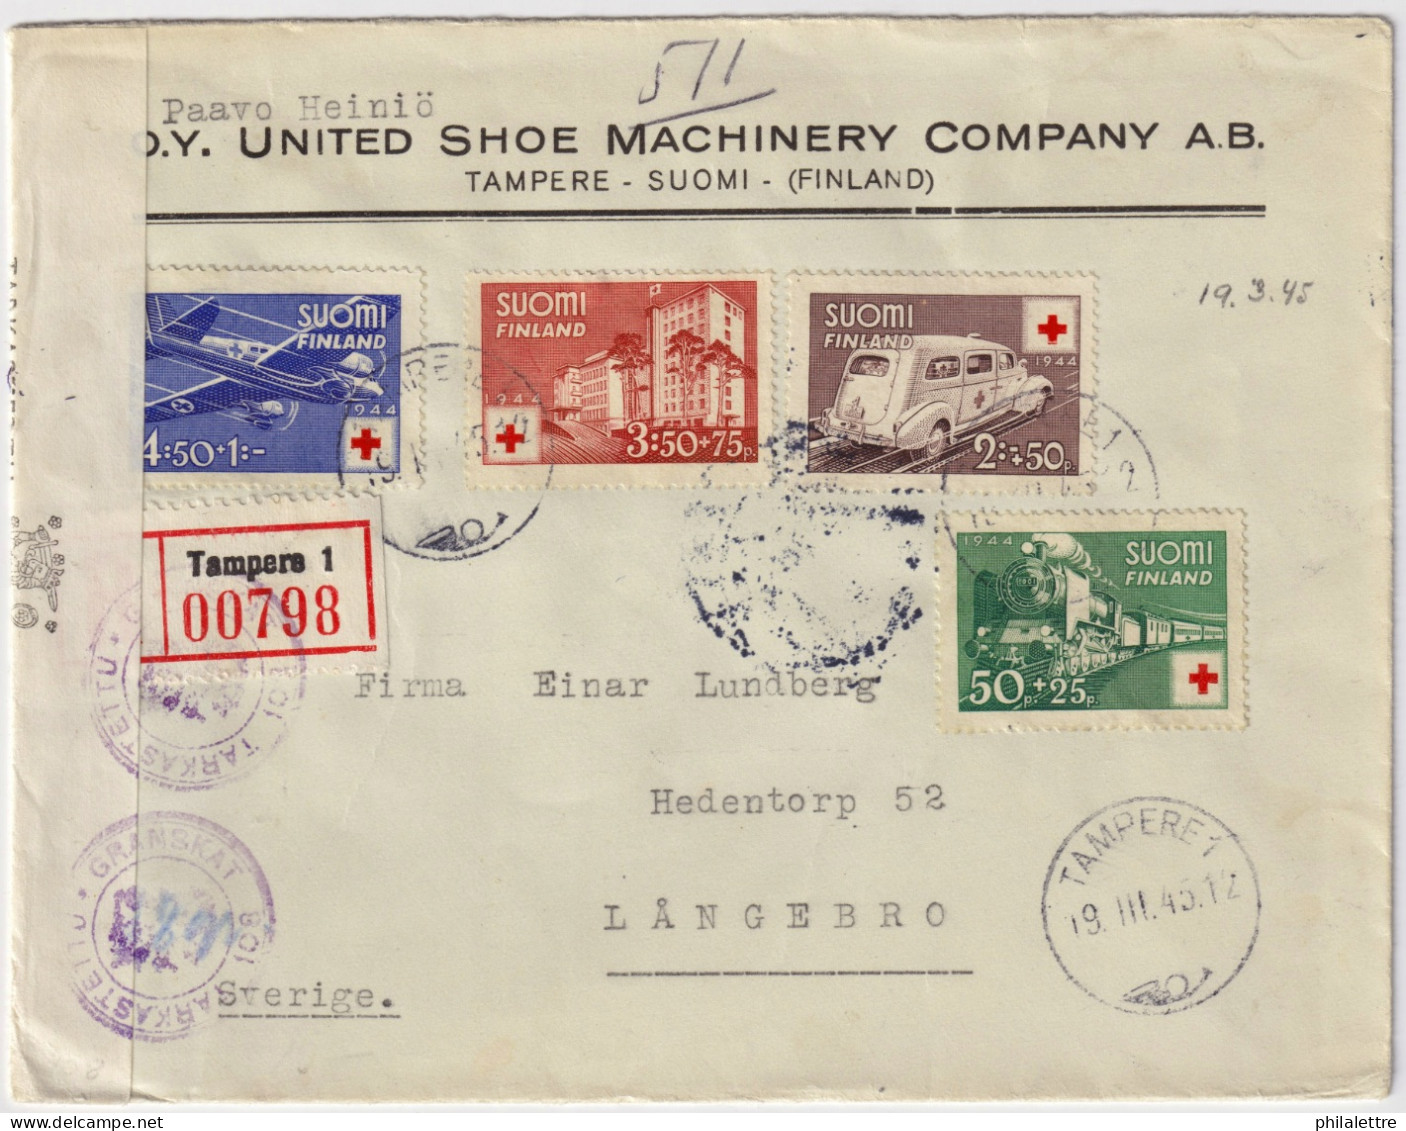 FINLAND - 1945 - Facit F282/5 Red Cross Set On Censored Registered Cover From TAMPERE 1 To LANGEBRO, Sweden - Covers & Documents